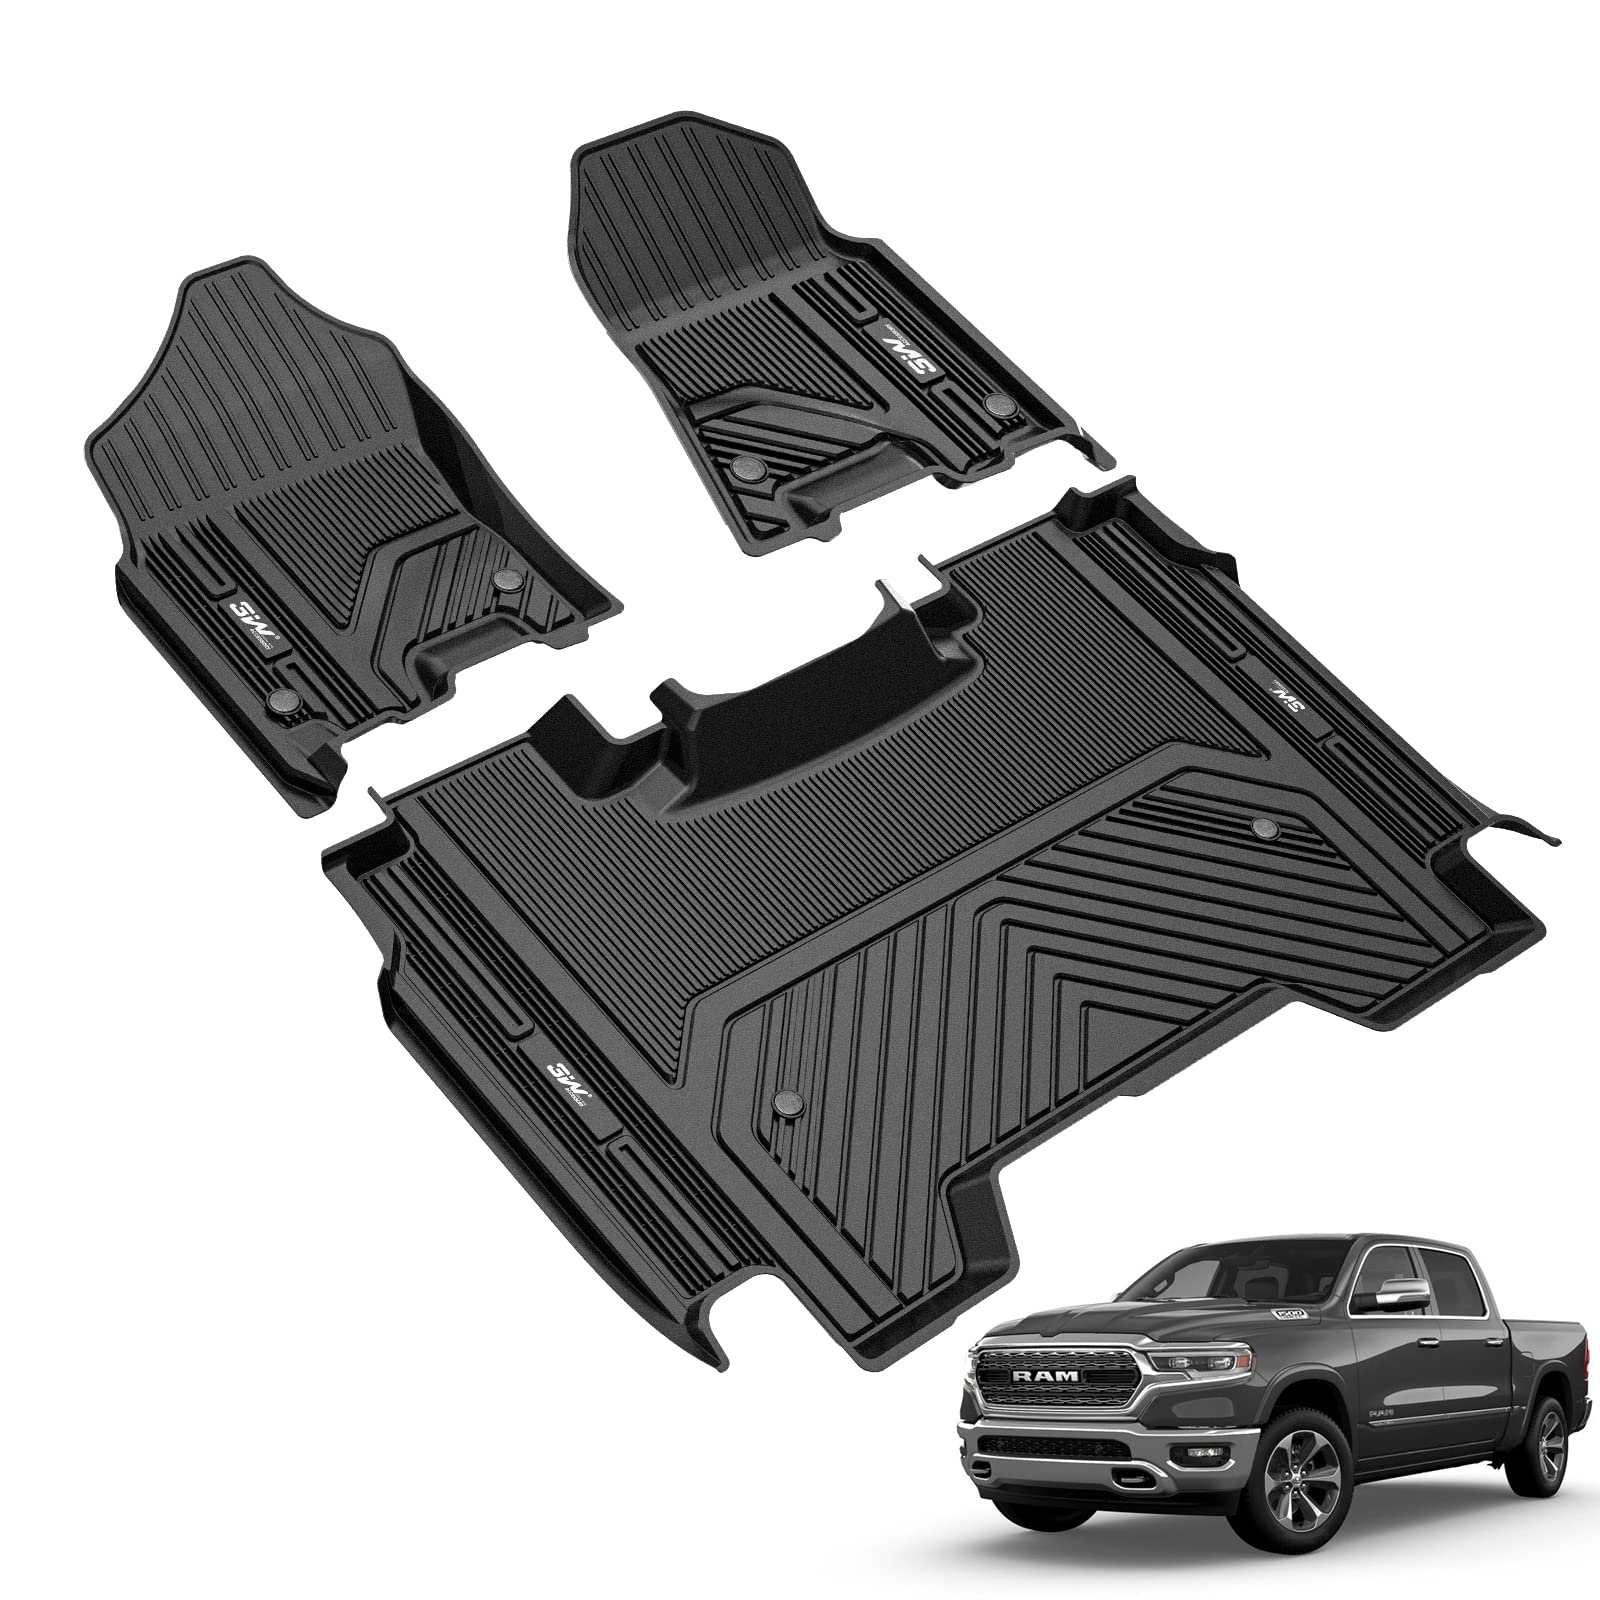 3W Dodge Ram 1500 2019-2024 New Body (NOT Classic Models) Custom Floor Mats TPE Material & All-Weather Protection Vehicles & Parts 3Wliners 2019-2024 Without Underseat Storage 1st&2nd Row Mats